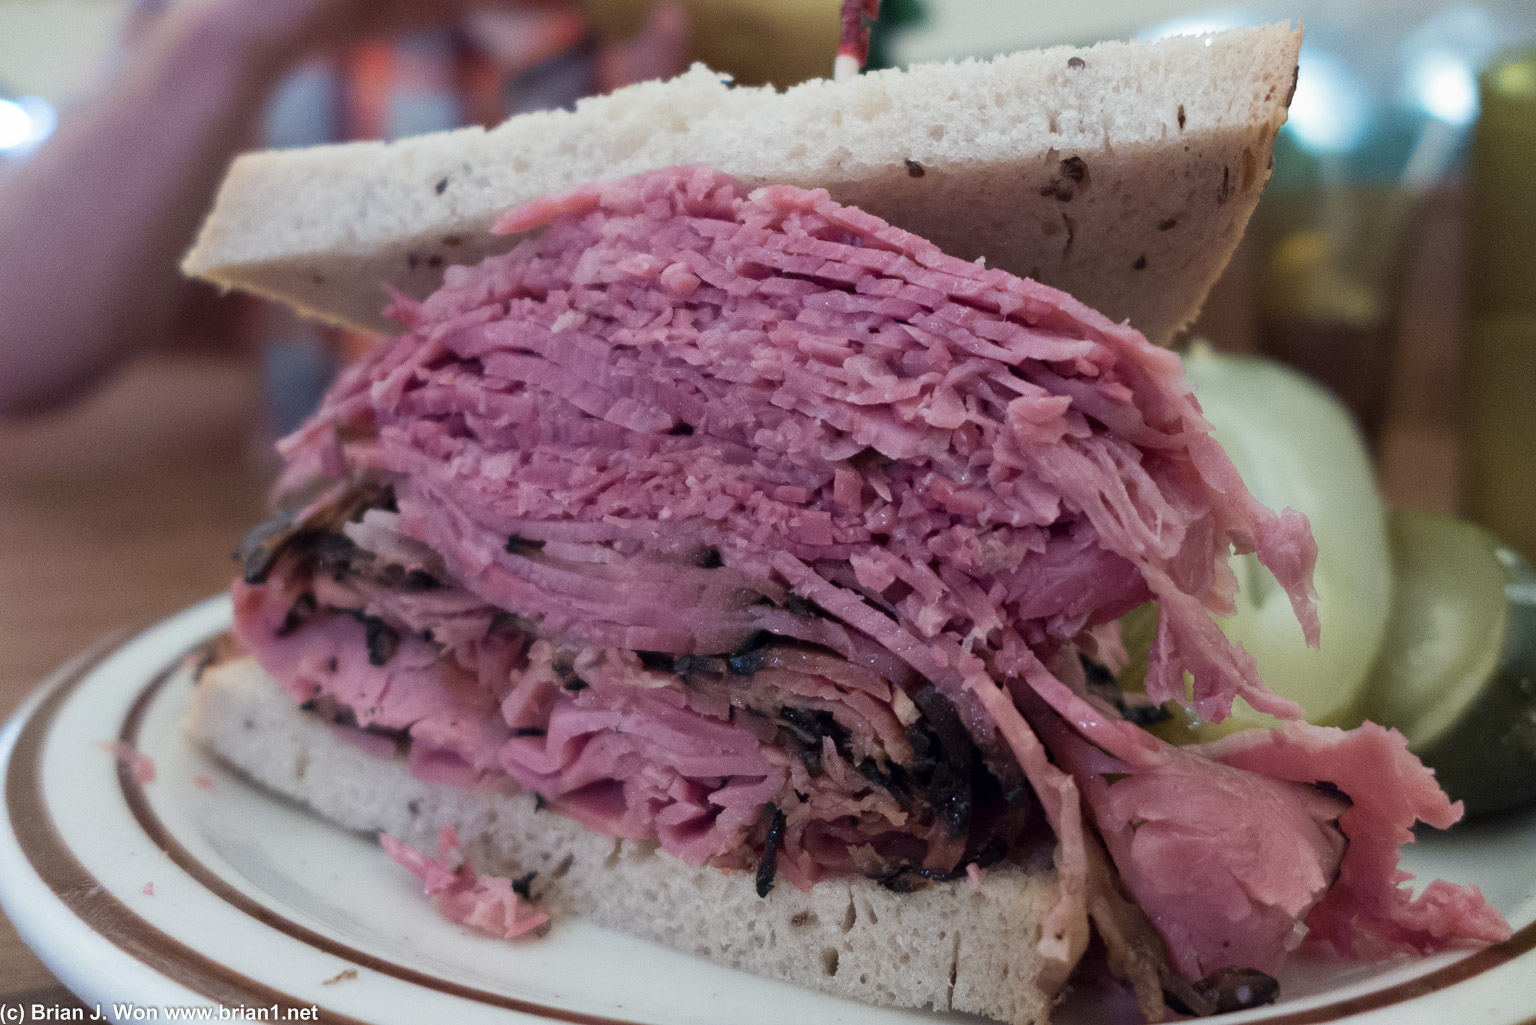 "Canters Fairfax." Pastrami and corned beef, piled high. Decent. With a slightly soggy pickle.